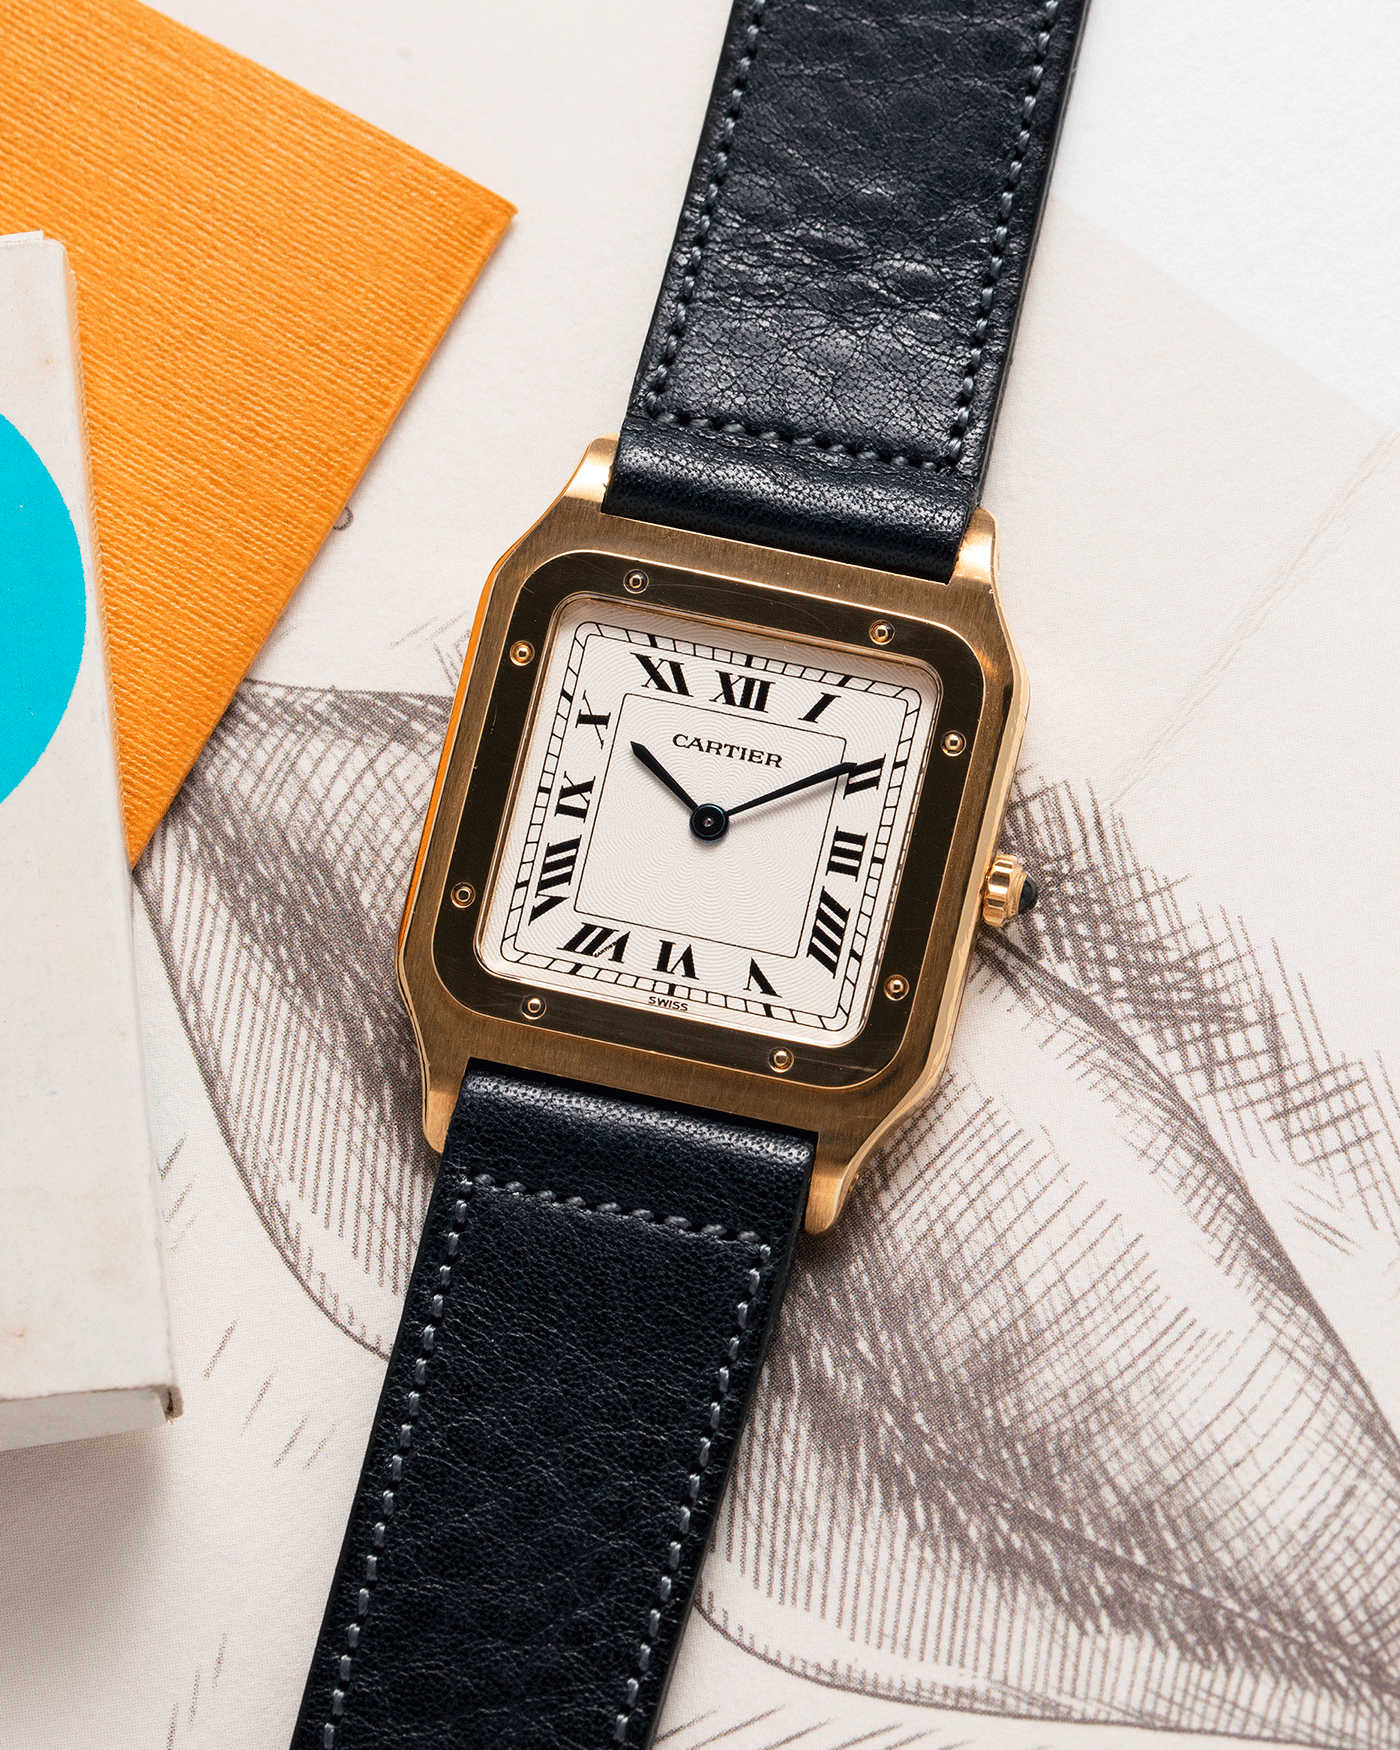 Brand: Cartier Year: 1990s Model: Santos Dumont Reference: 1576 Material: 18k Yellow Gold Movement: F.Piguet 21 Case Diameter: 27mm Strap: Accurate Form Navy Blue Japanese Calf and 18k Yellow Gold Cartier Deployant